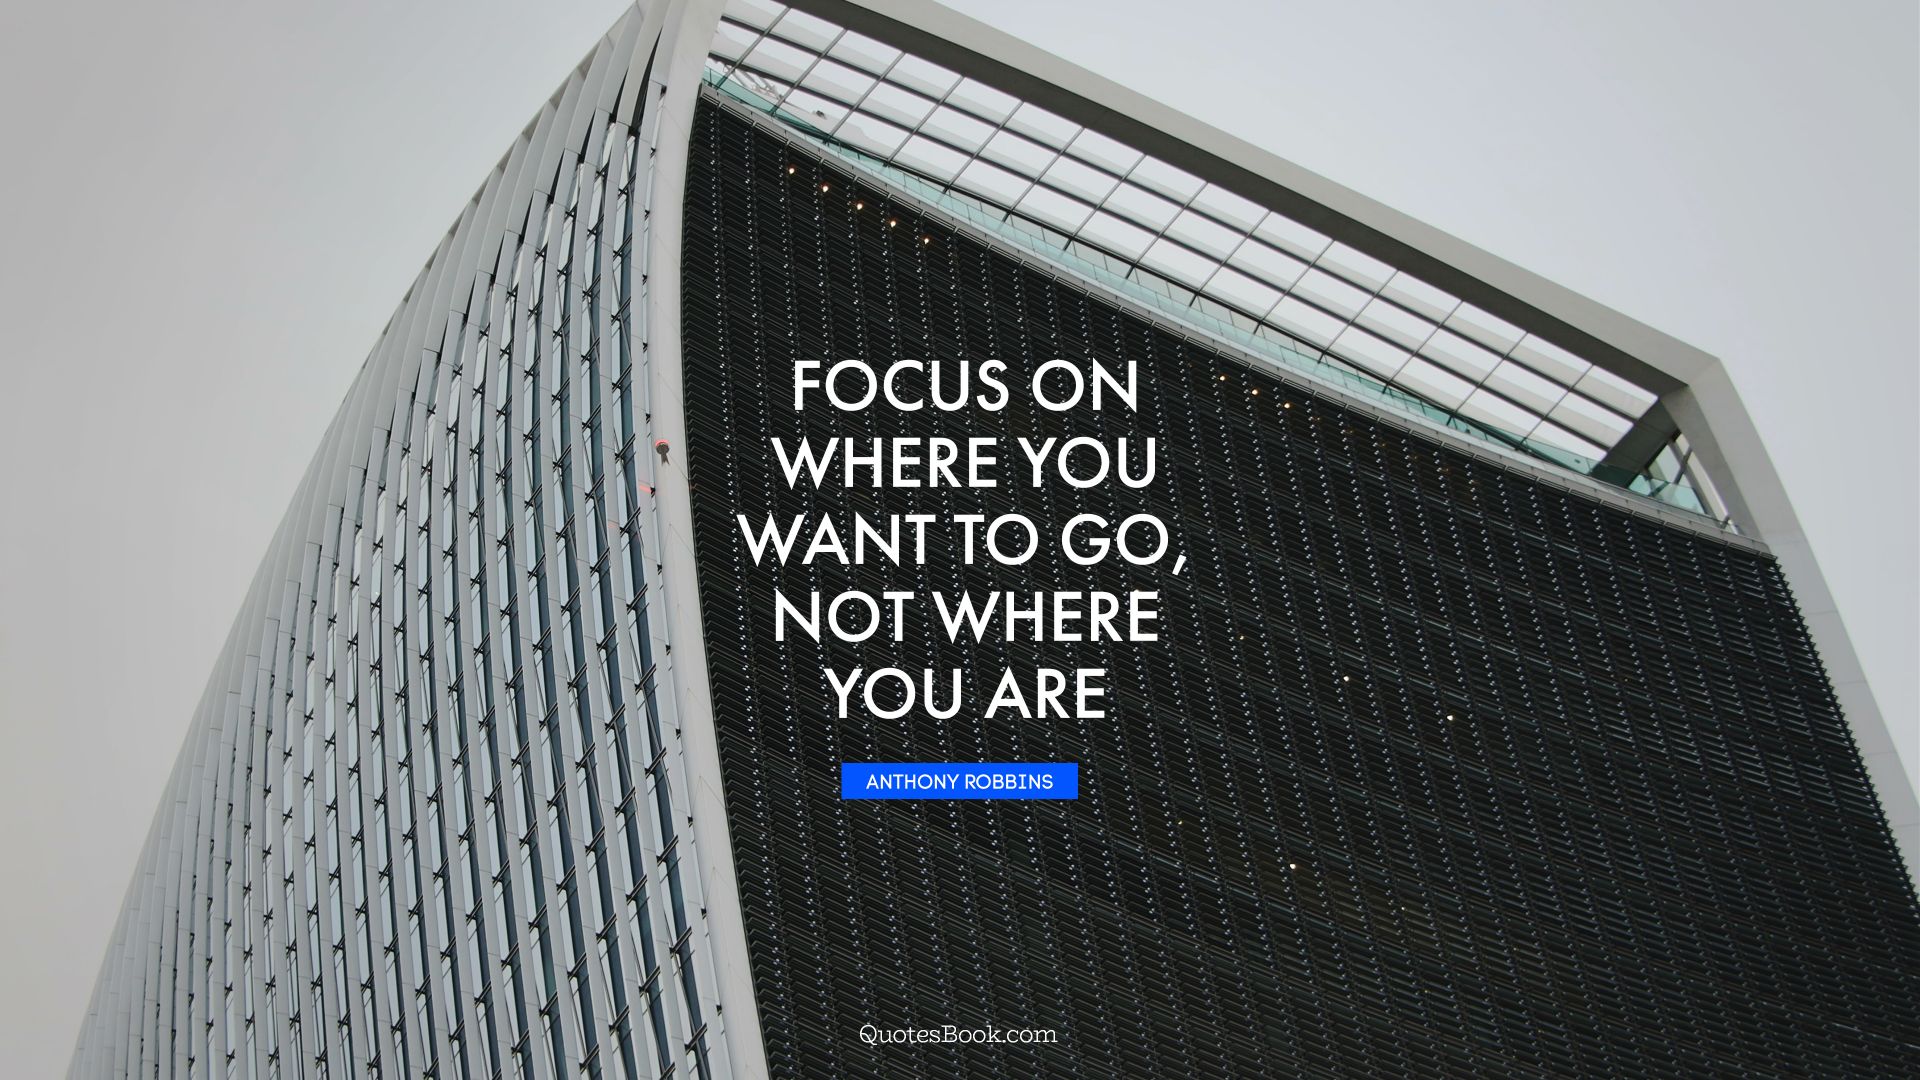 Focus on where you want to go, not where you are. - Quote by Anthony Robbins